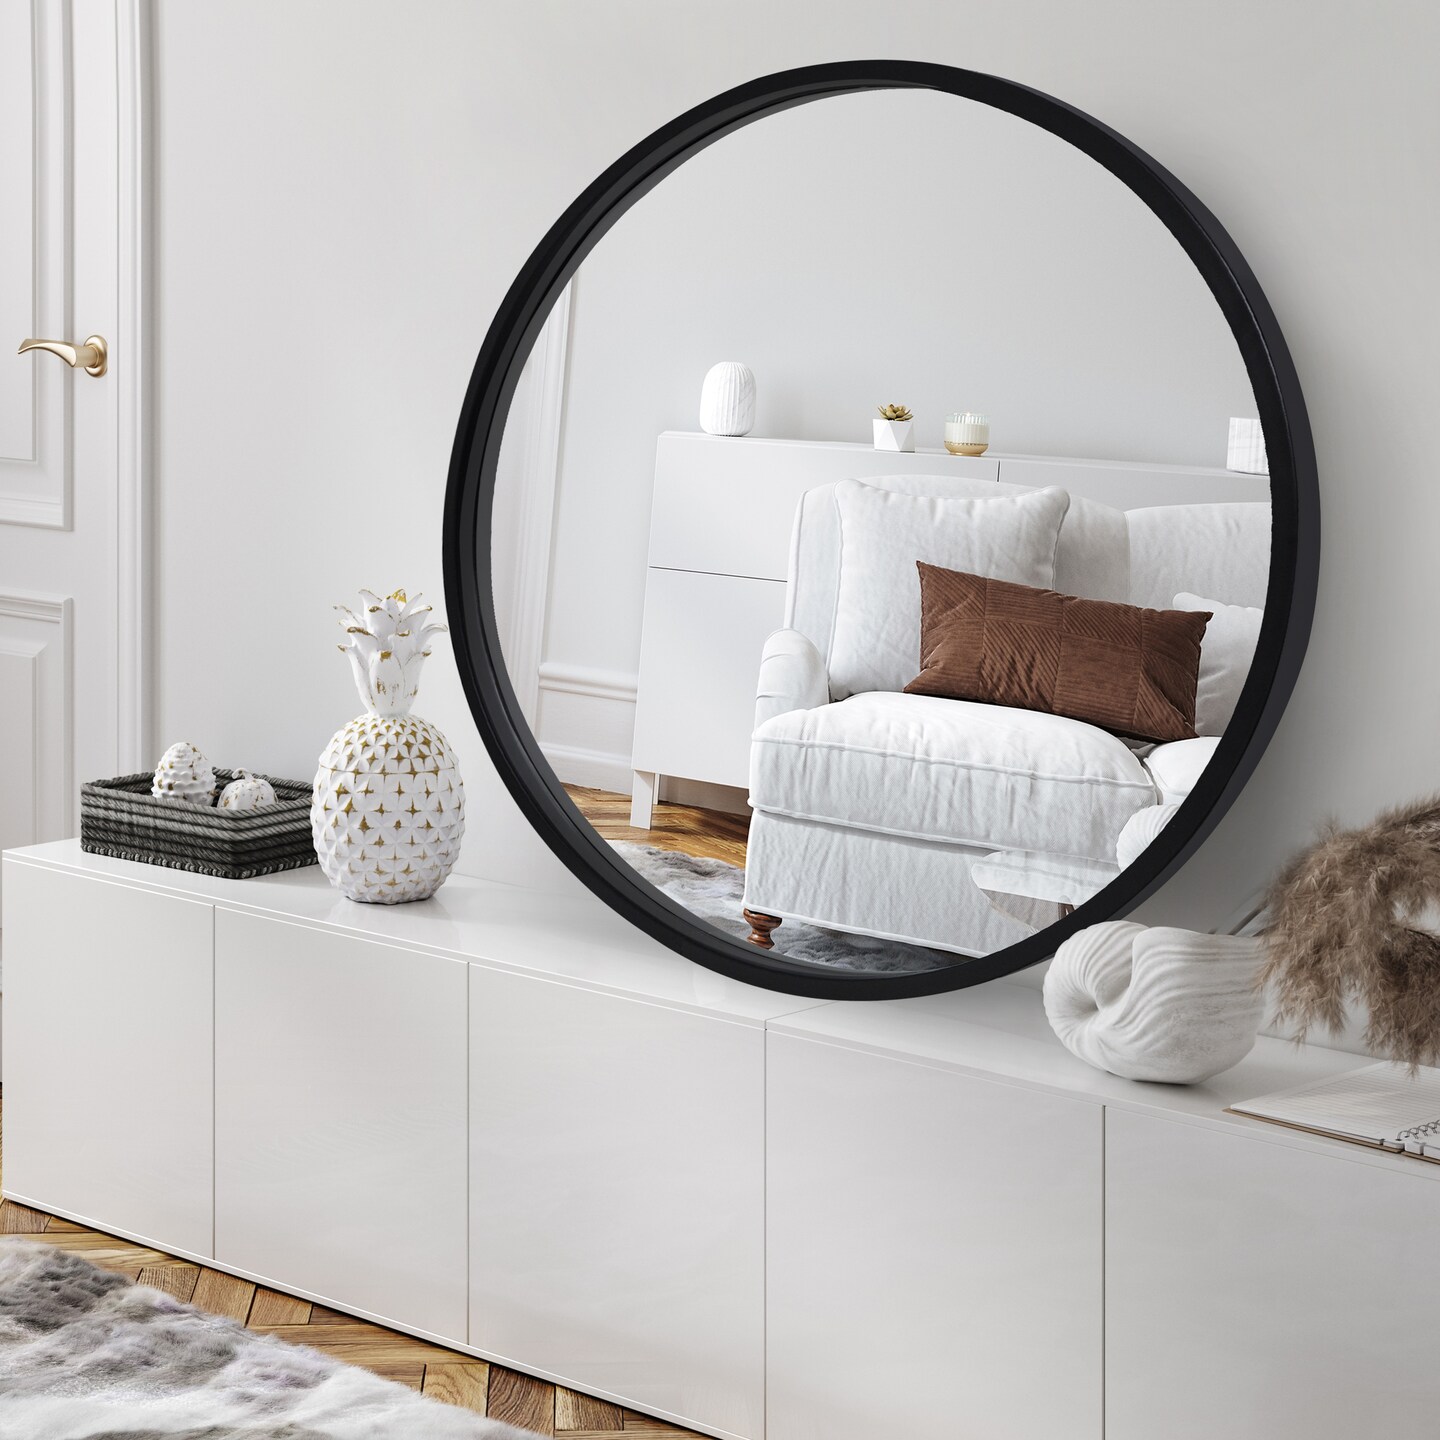 Americanflat Framed Round Mirror - Circle Mirror for Bathroom, Bedroom, Entryway, Living Room - Large Black Circle Mirror for Wall D&#xE9;cor